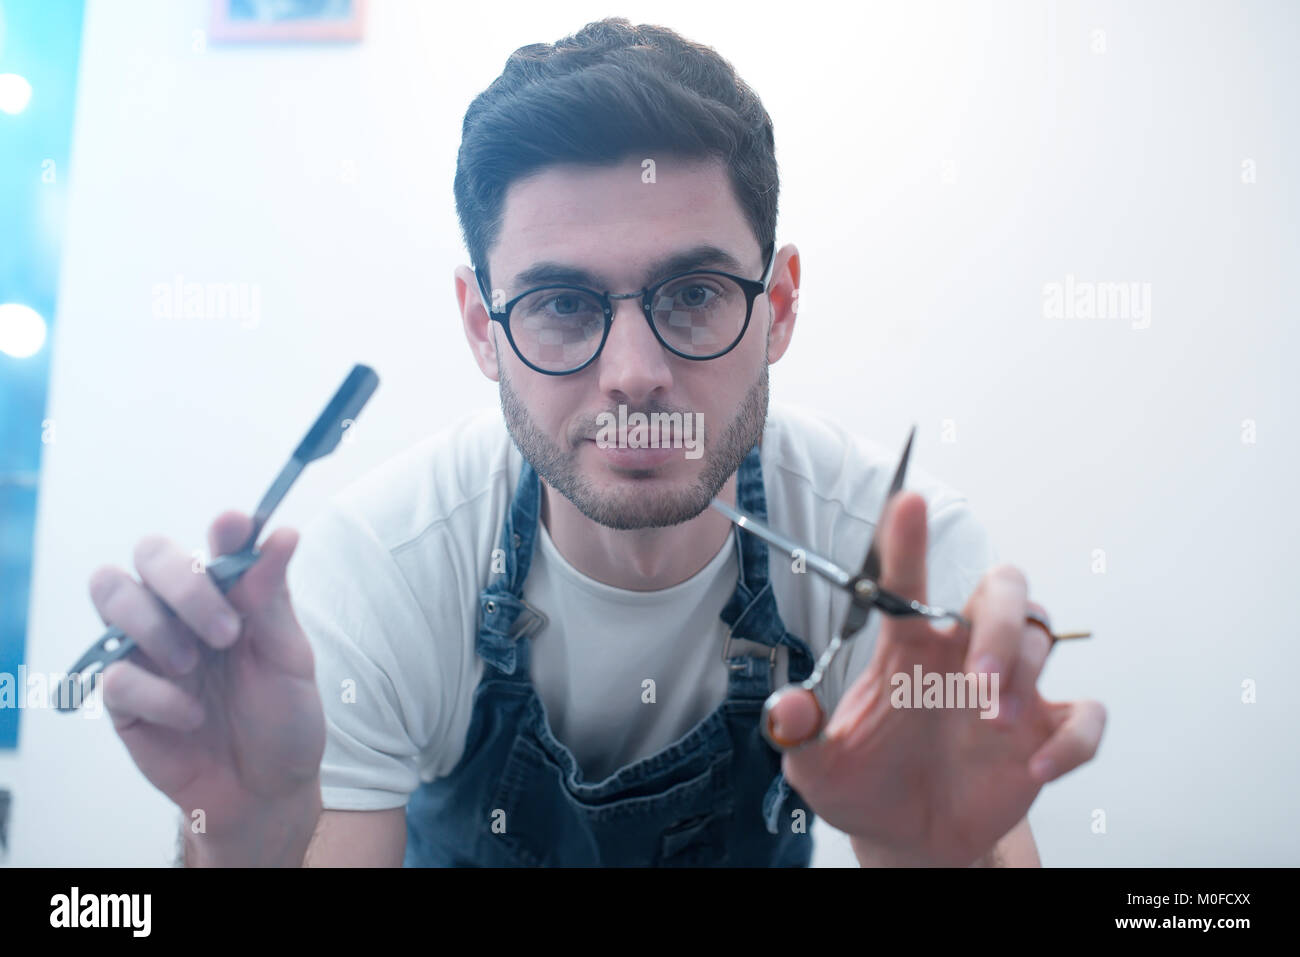 Barber keeps scissors and a razor against the background of a white wall. Stock Photo